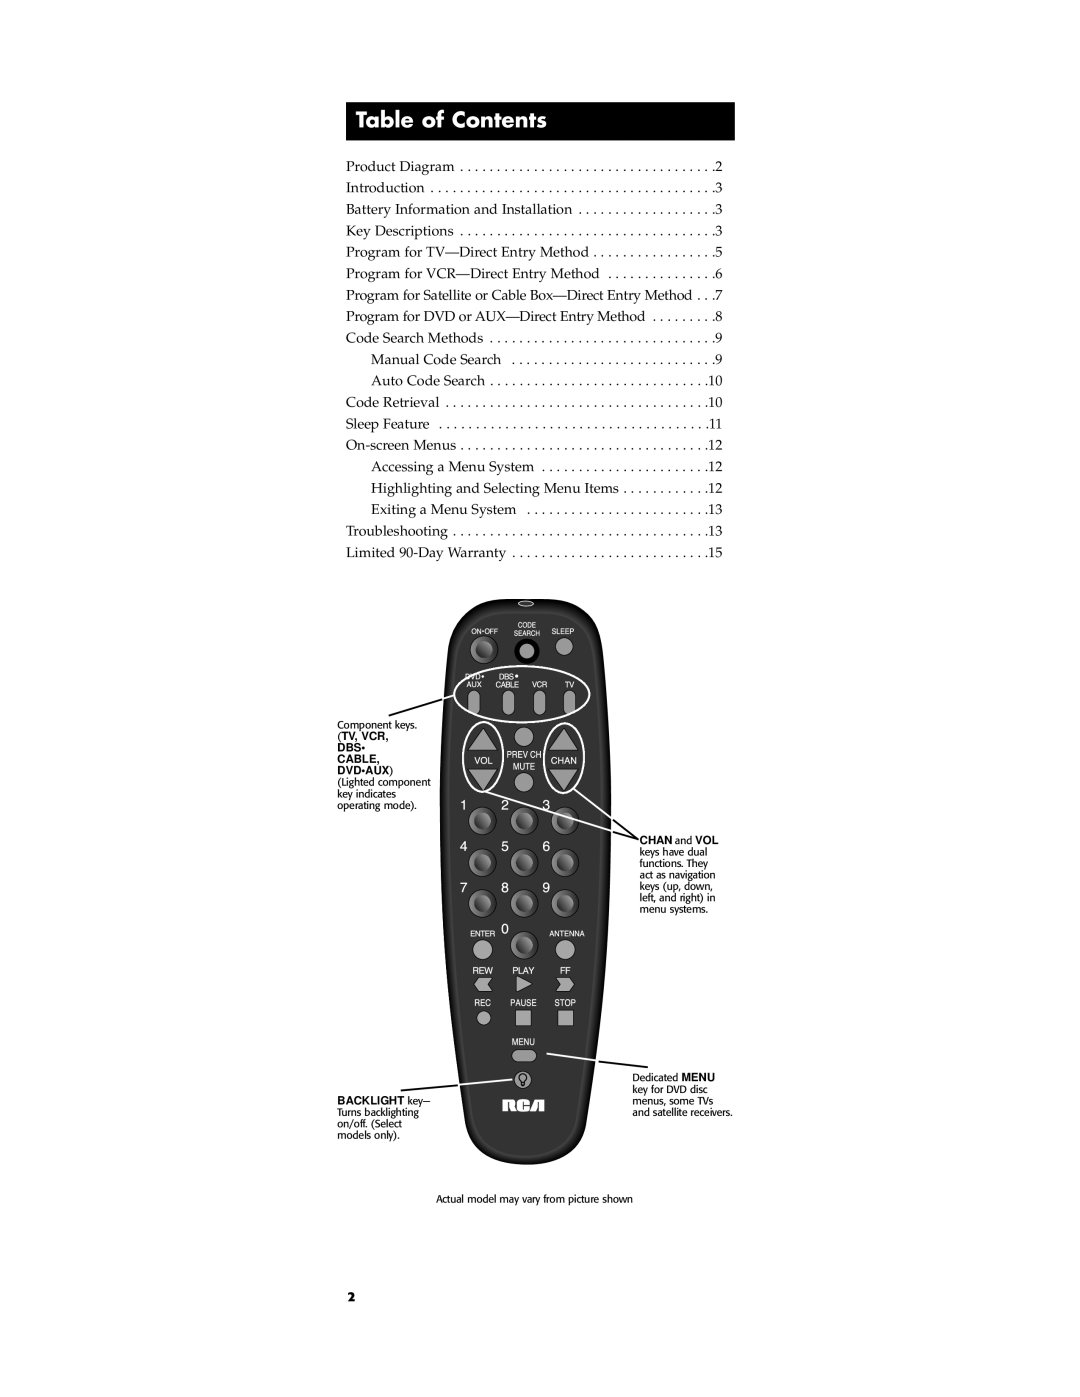 RCA pp18l, RCU450 manual Table of Contents, Manual Code Search Auto Code Search Code Retrieval Sleep Feature 